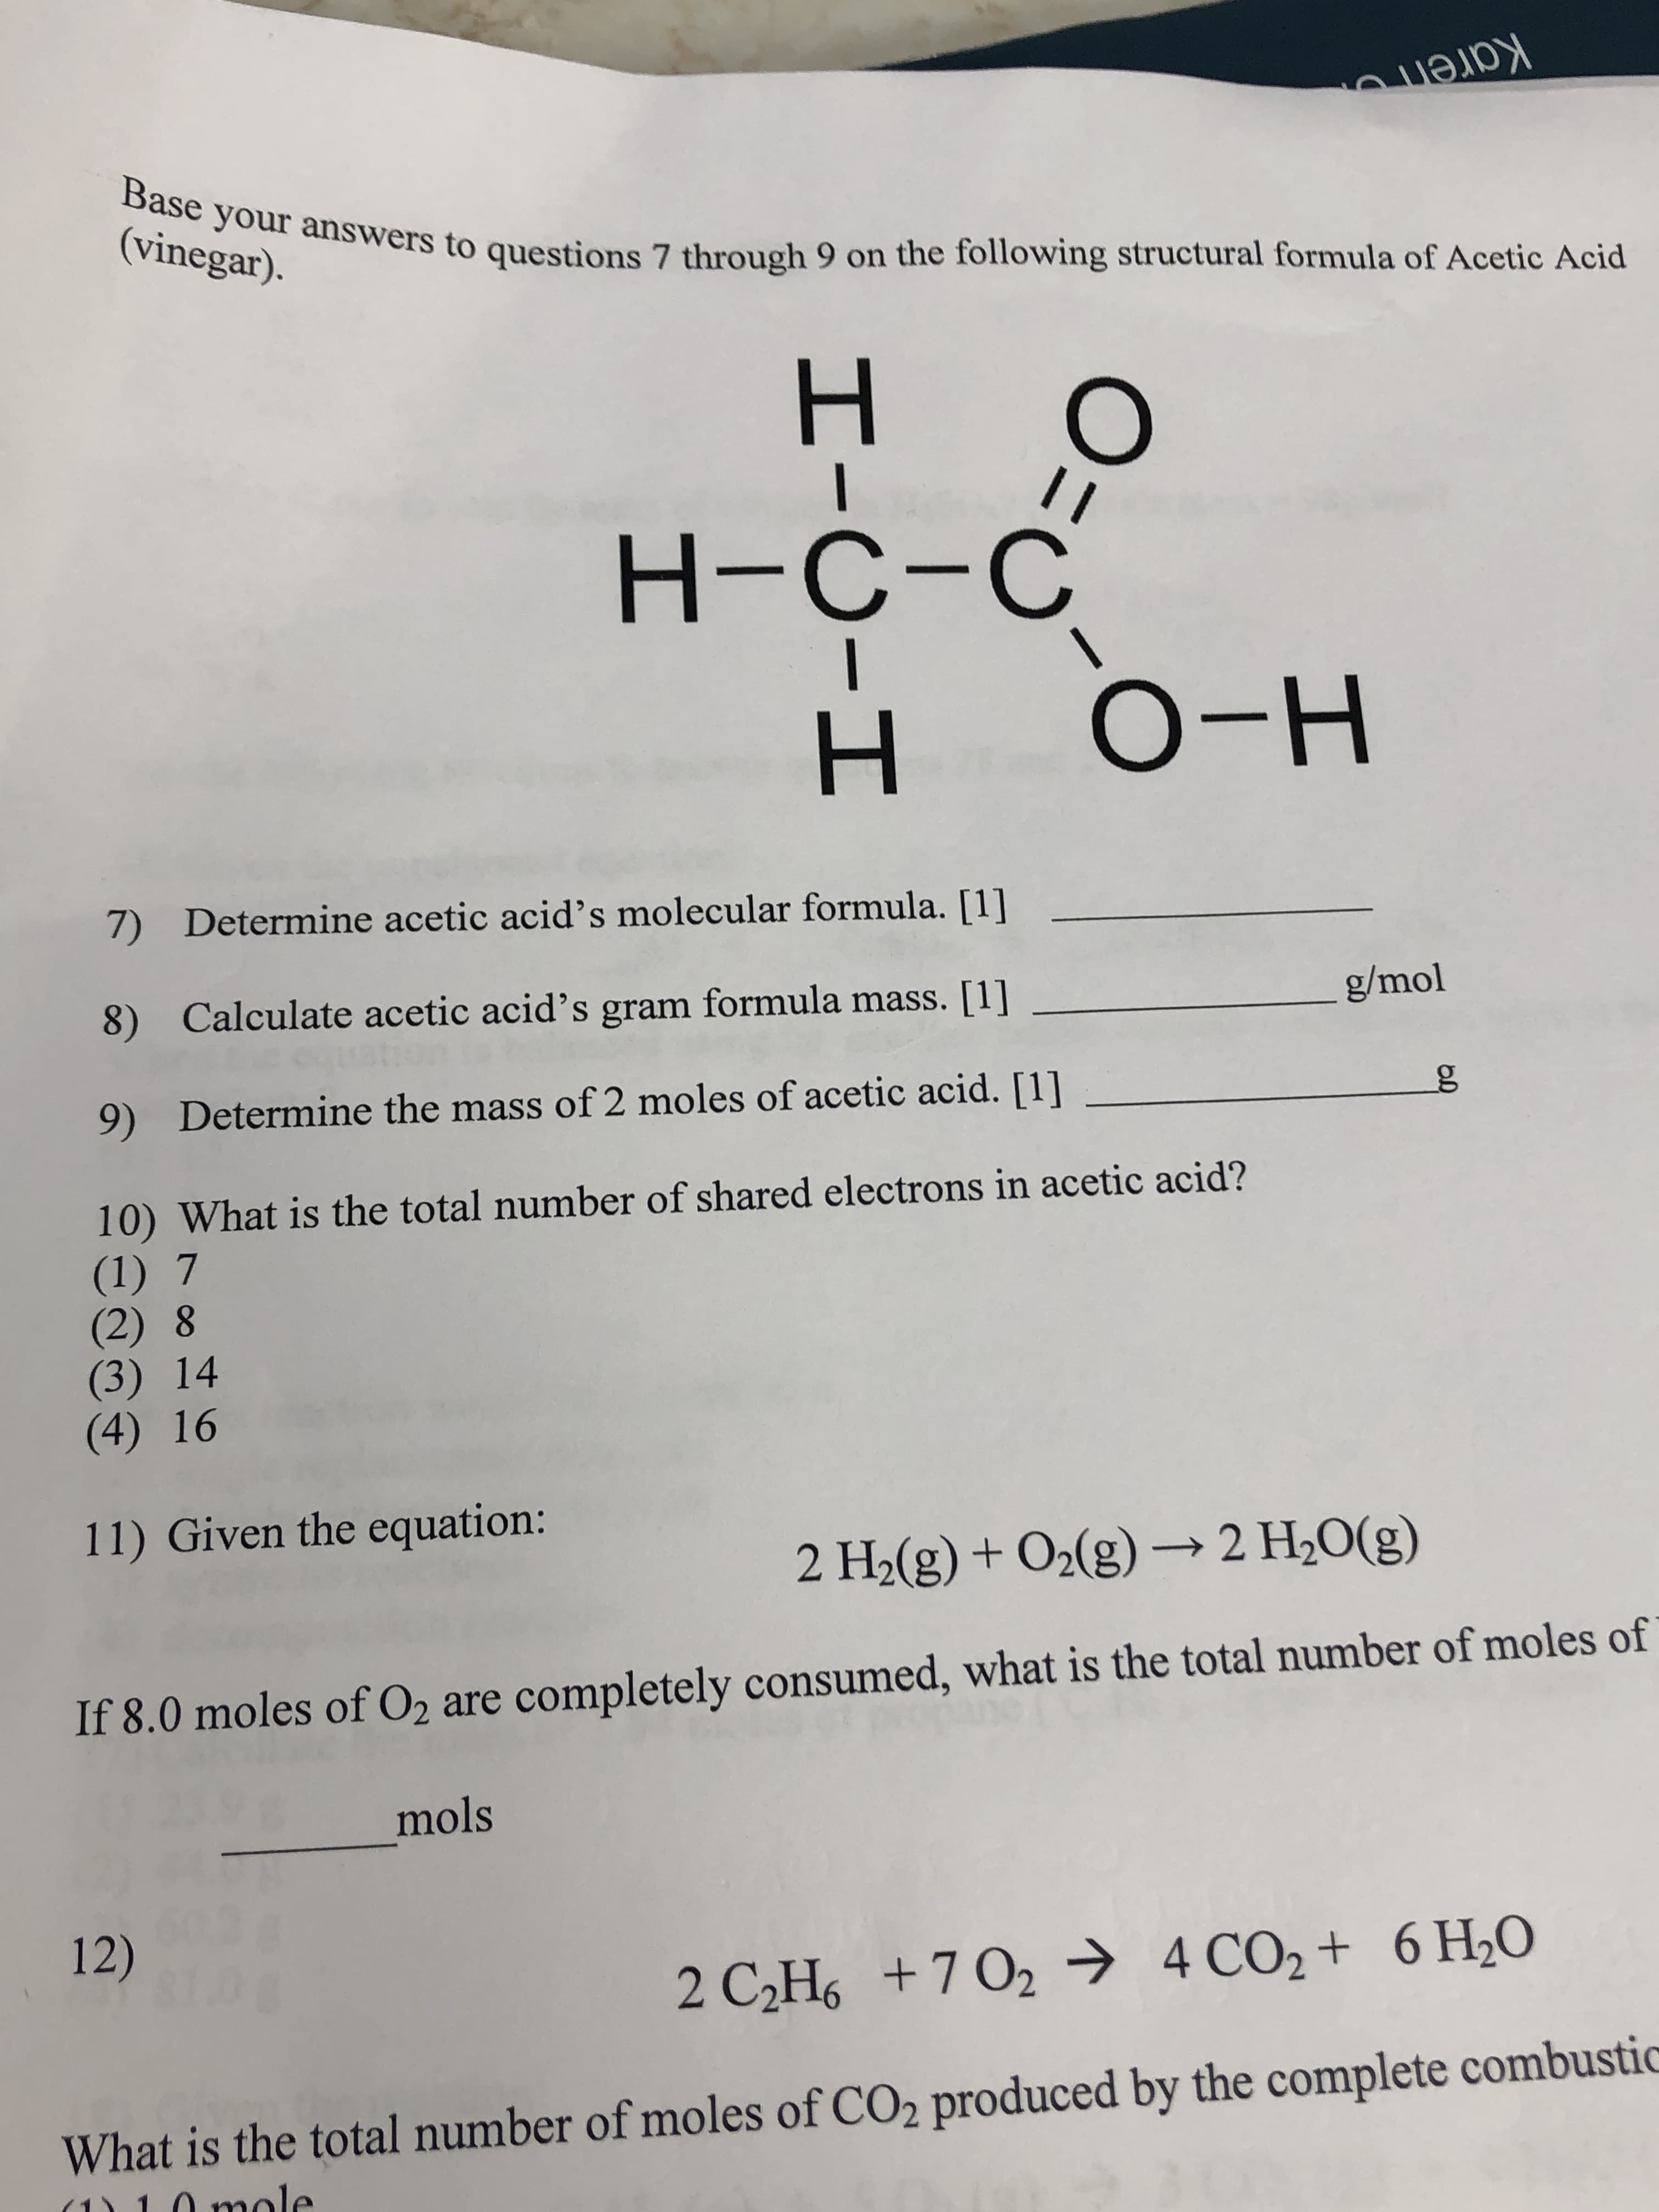 Karen
Base your answers to questions 7 through 9 on the following structural formula of Acetic Acid
(vinegar).
н-
о-н
Determine acetic acid's molecular formula. [1]
7)
g/mol
Calculate acetic acid's gram formula mass. [1]
8)
g
Determine the mass of 2 moles of acetic acid. [1]
9)
10) What is the total number of shared electrons in acetic acid?
(1) 7
(2) 8
(3) 14
(4) 16
11) Given the equation:
2 H2(g) + O2(g)2 H20(g)
If 8.0 moles of O2 are completely consumed, what is the total number of moles of
mols
12)
4 CO2+ 6 H20
2 C2Hs+7 02
What is the total number of moles of CO2 produced by the complete combustic
n mole
O=
I-O-I
